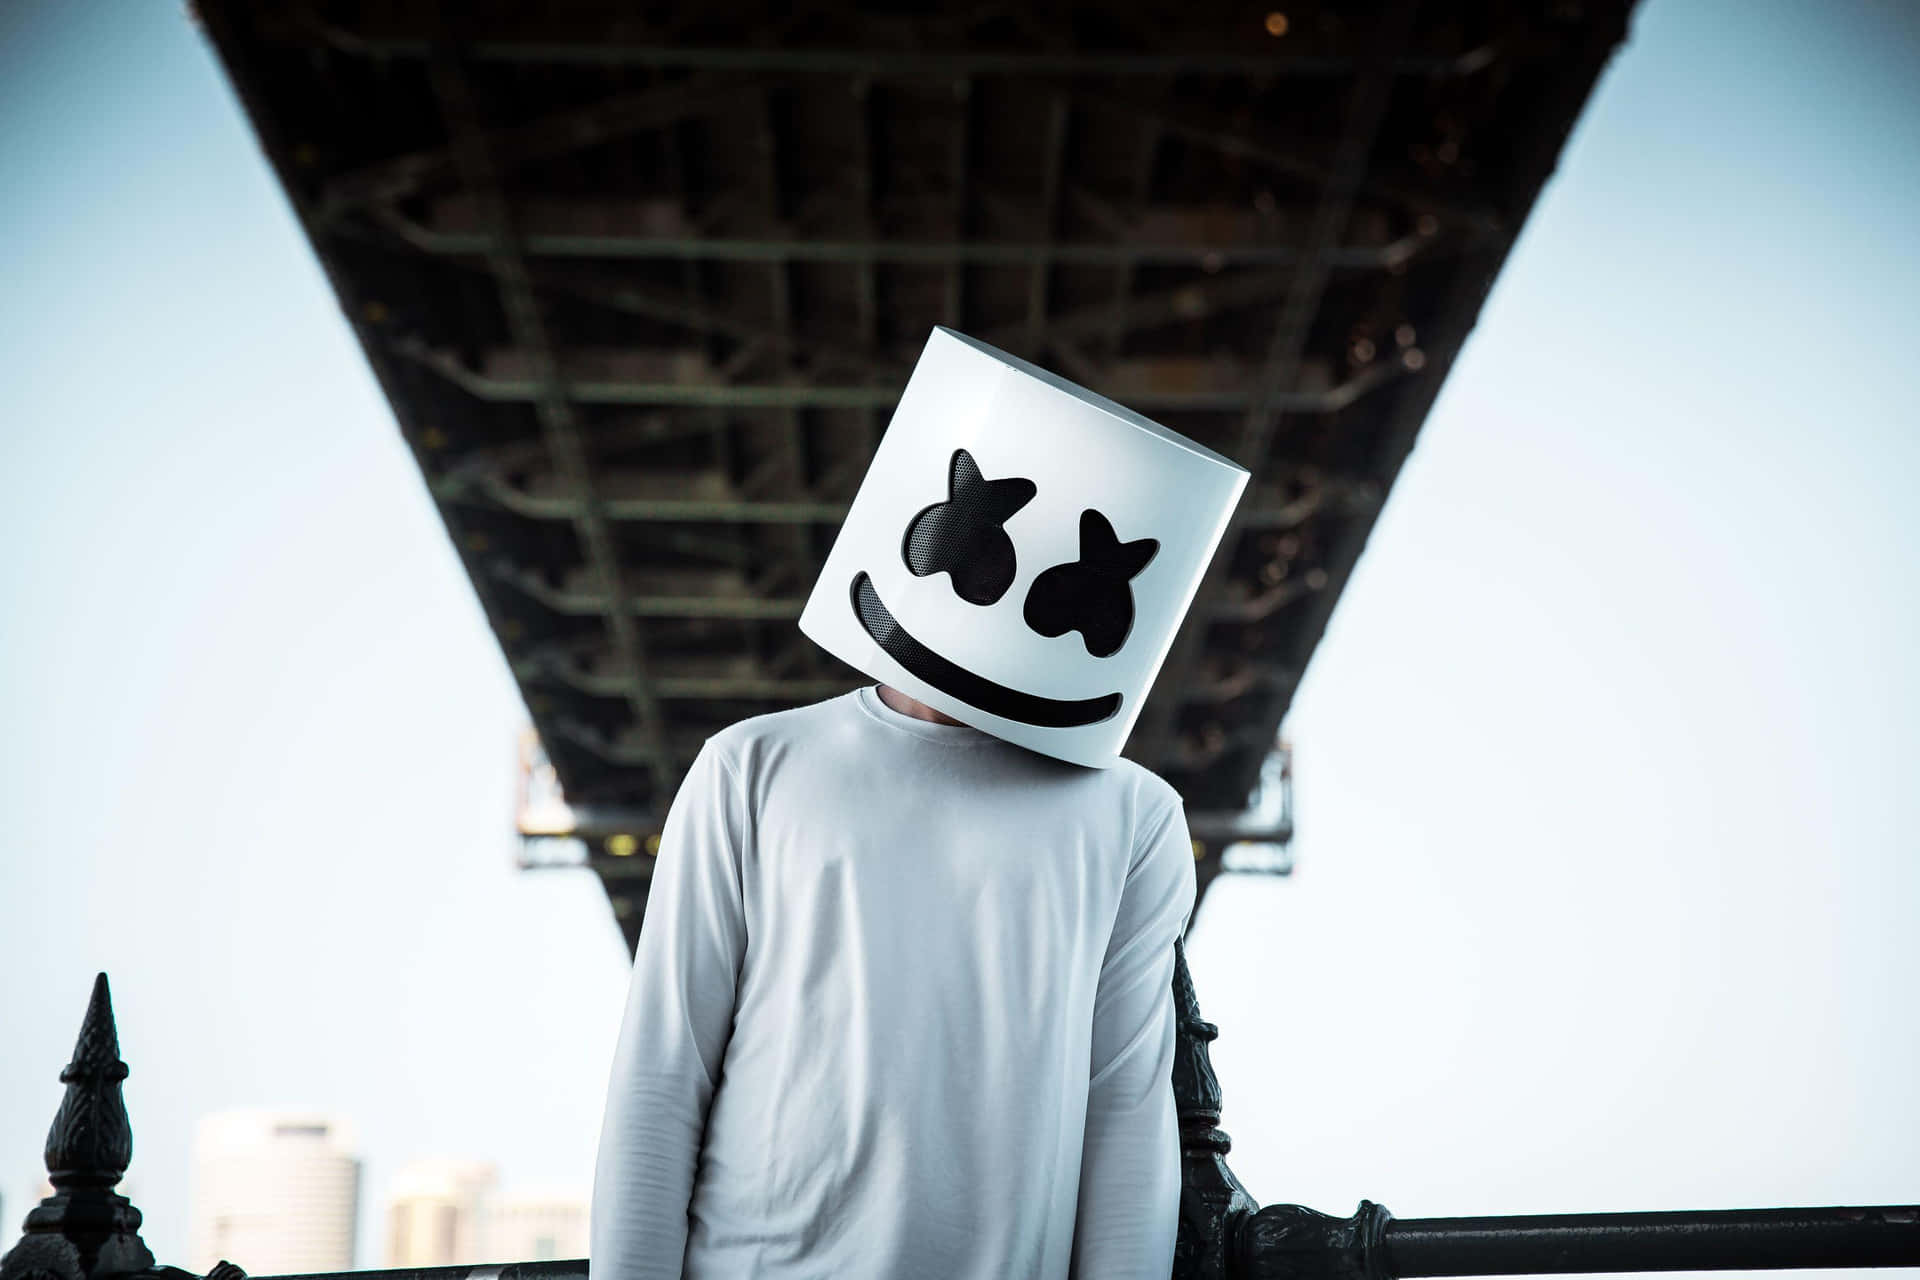 Marshmello, the world-renowned DJ and Producer